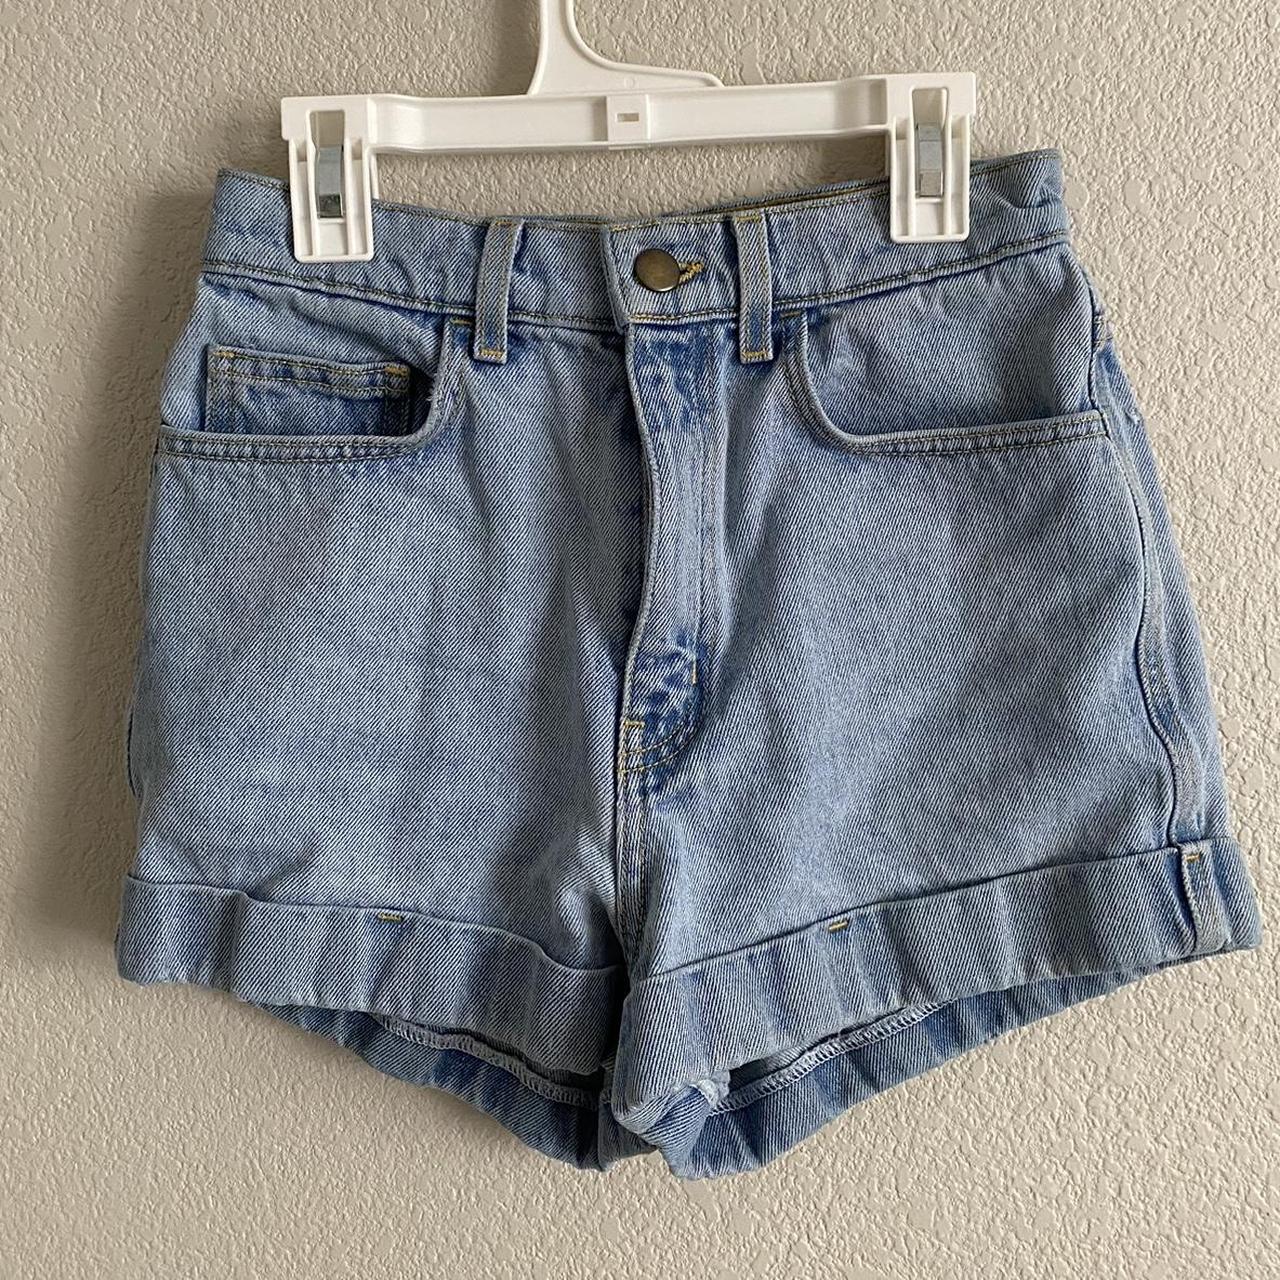 American Apparel shorts in light wash. Small hole on... - Depop